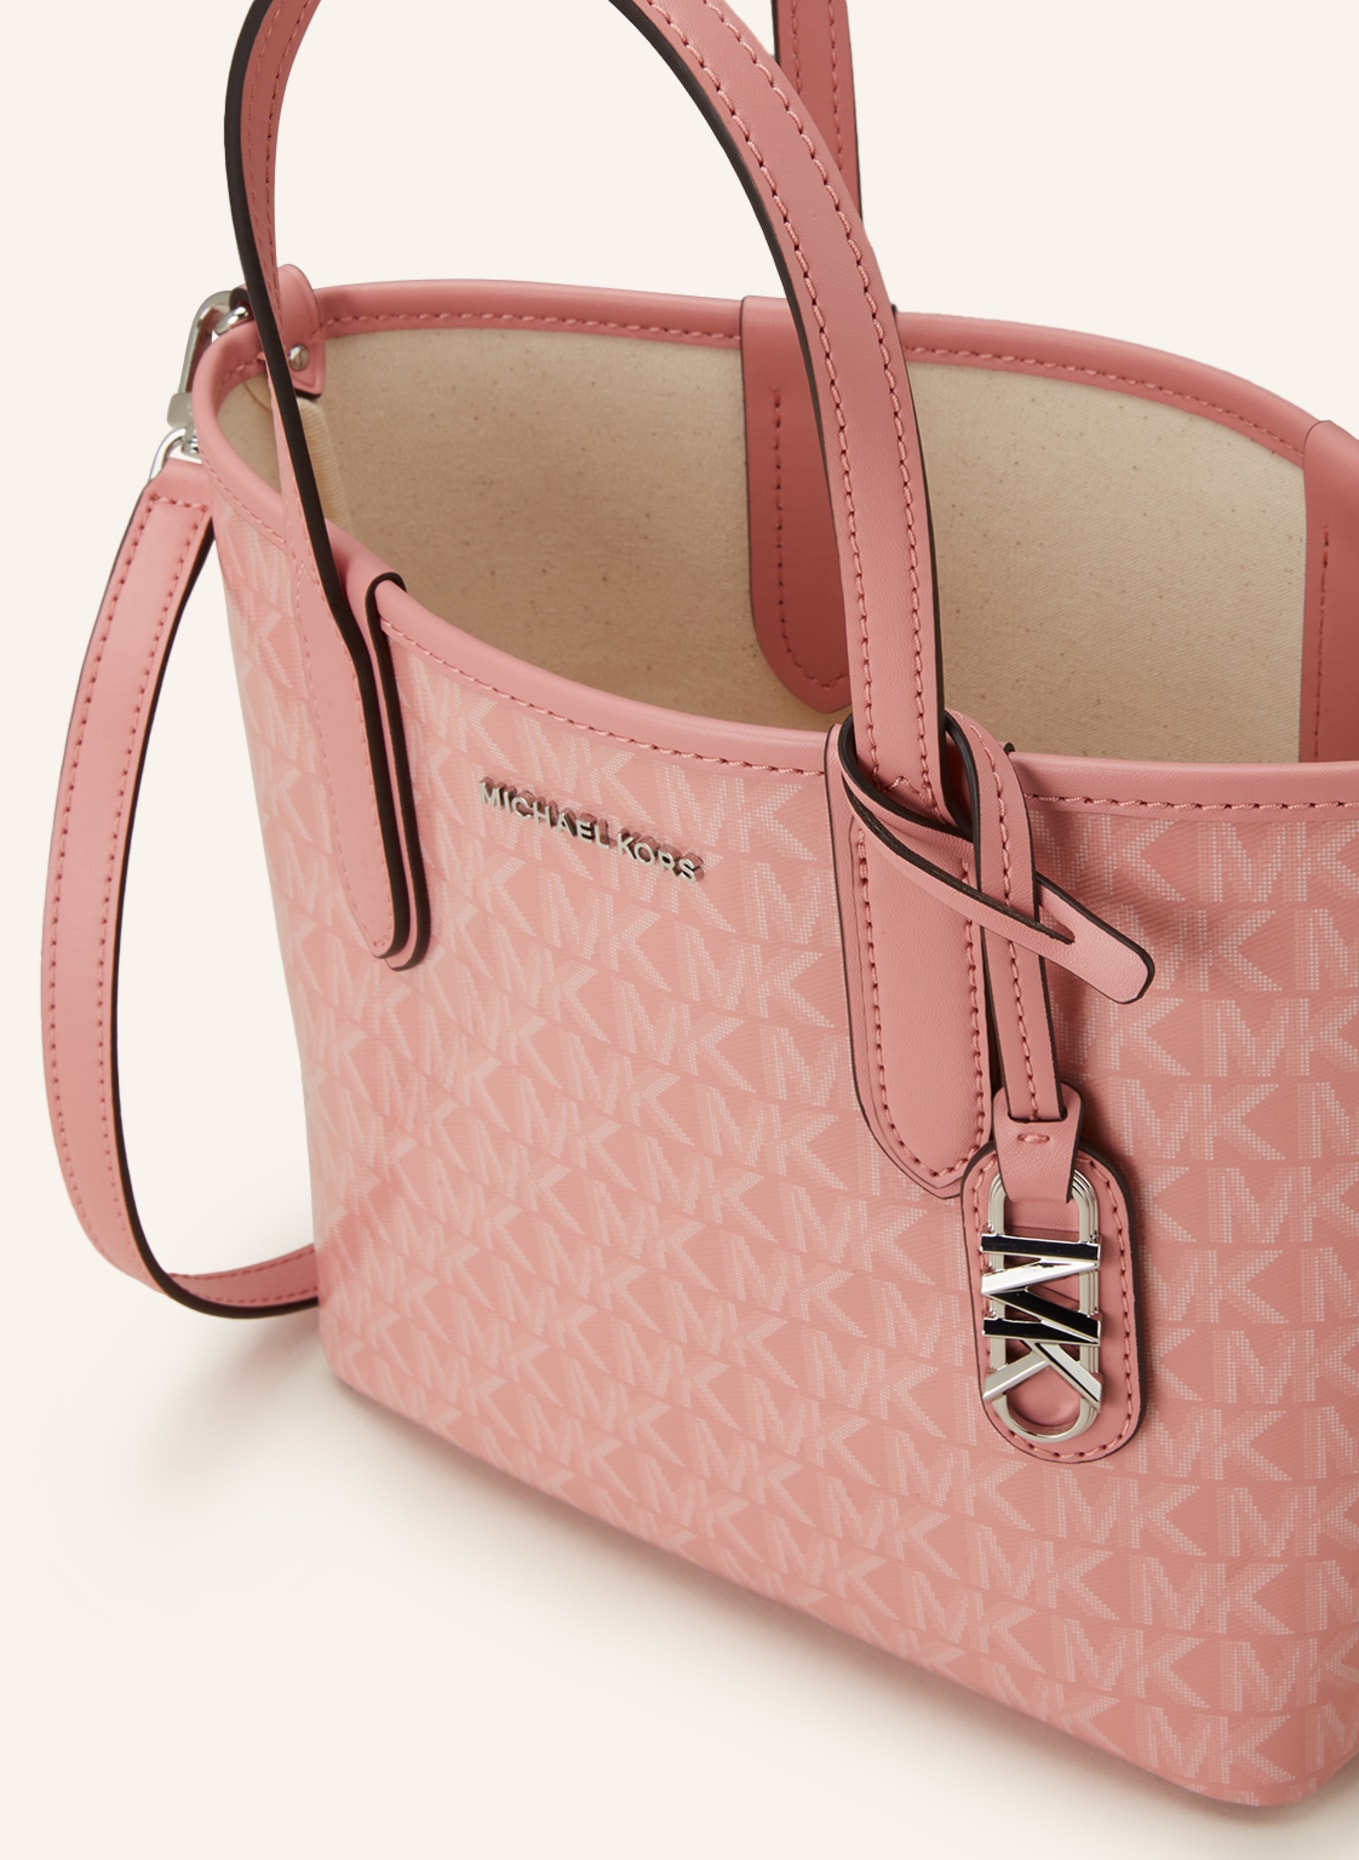 Michael Kors sale: KORSVIP members save an extra 25% on MK bags, totes, and  watches - Reviewed